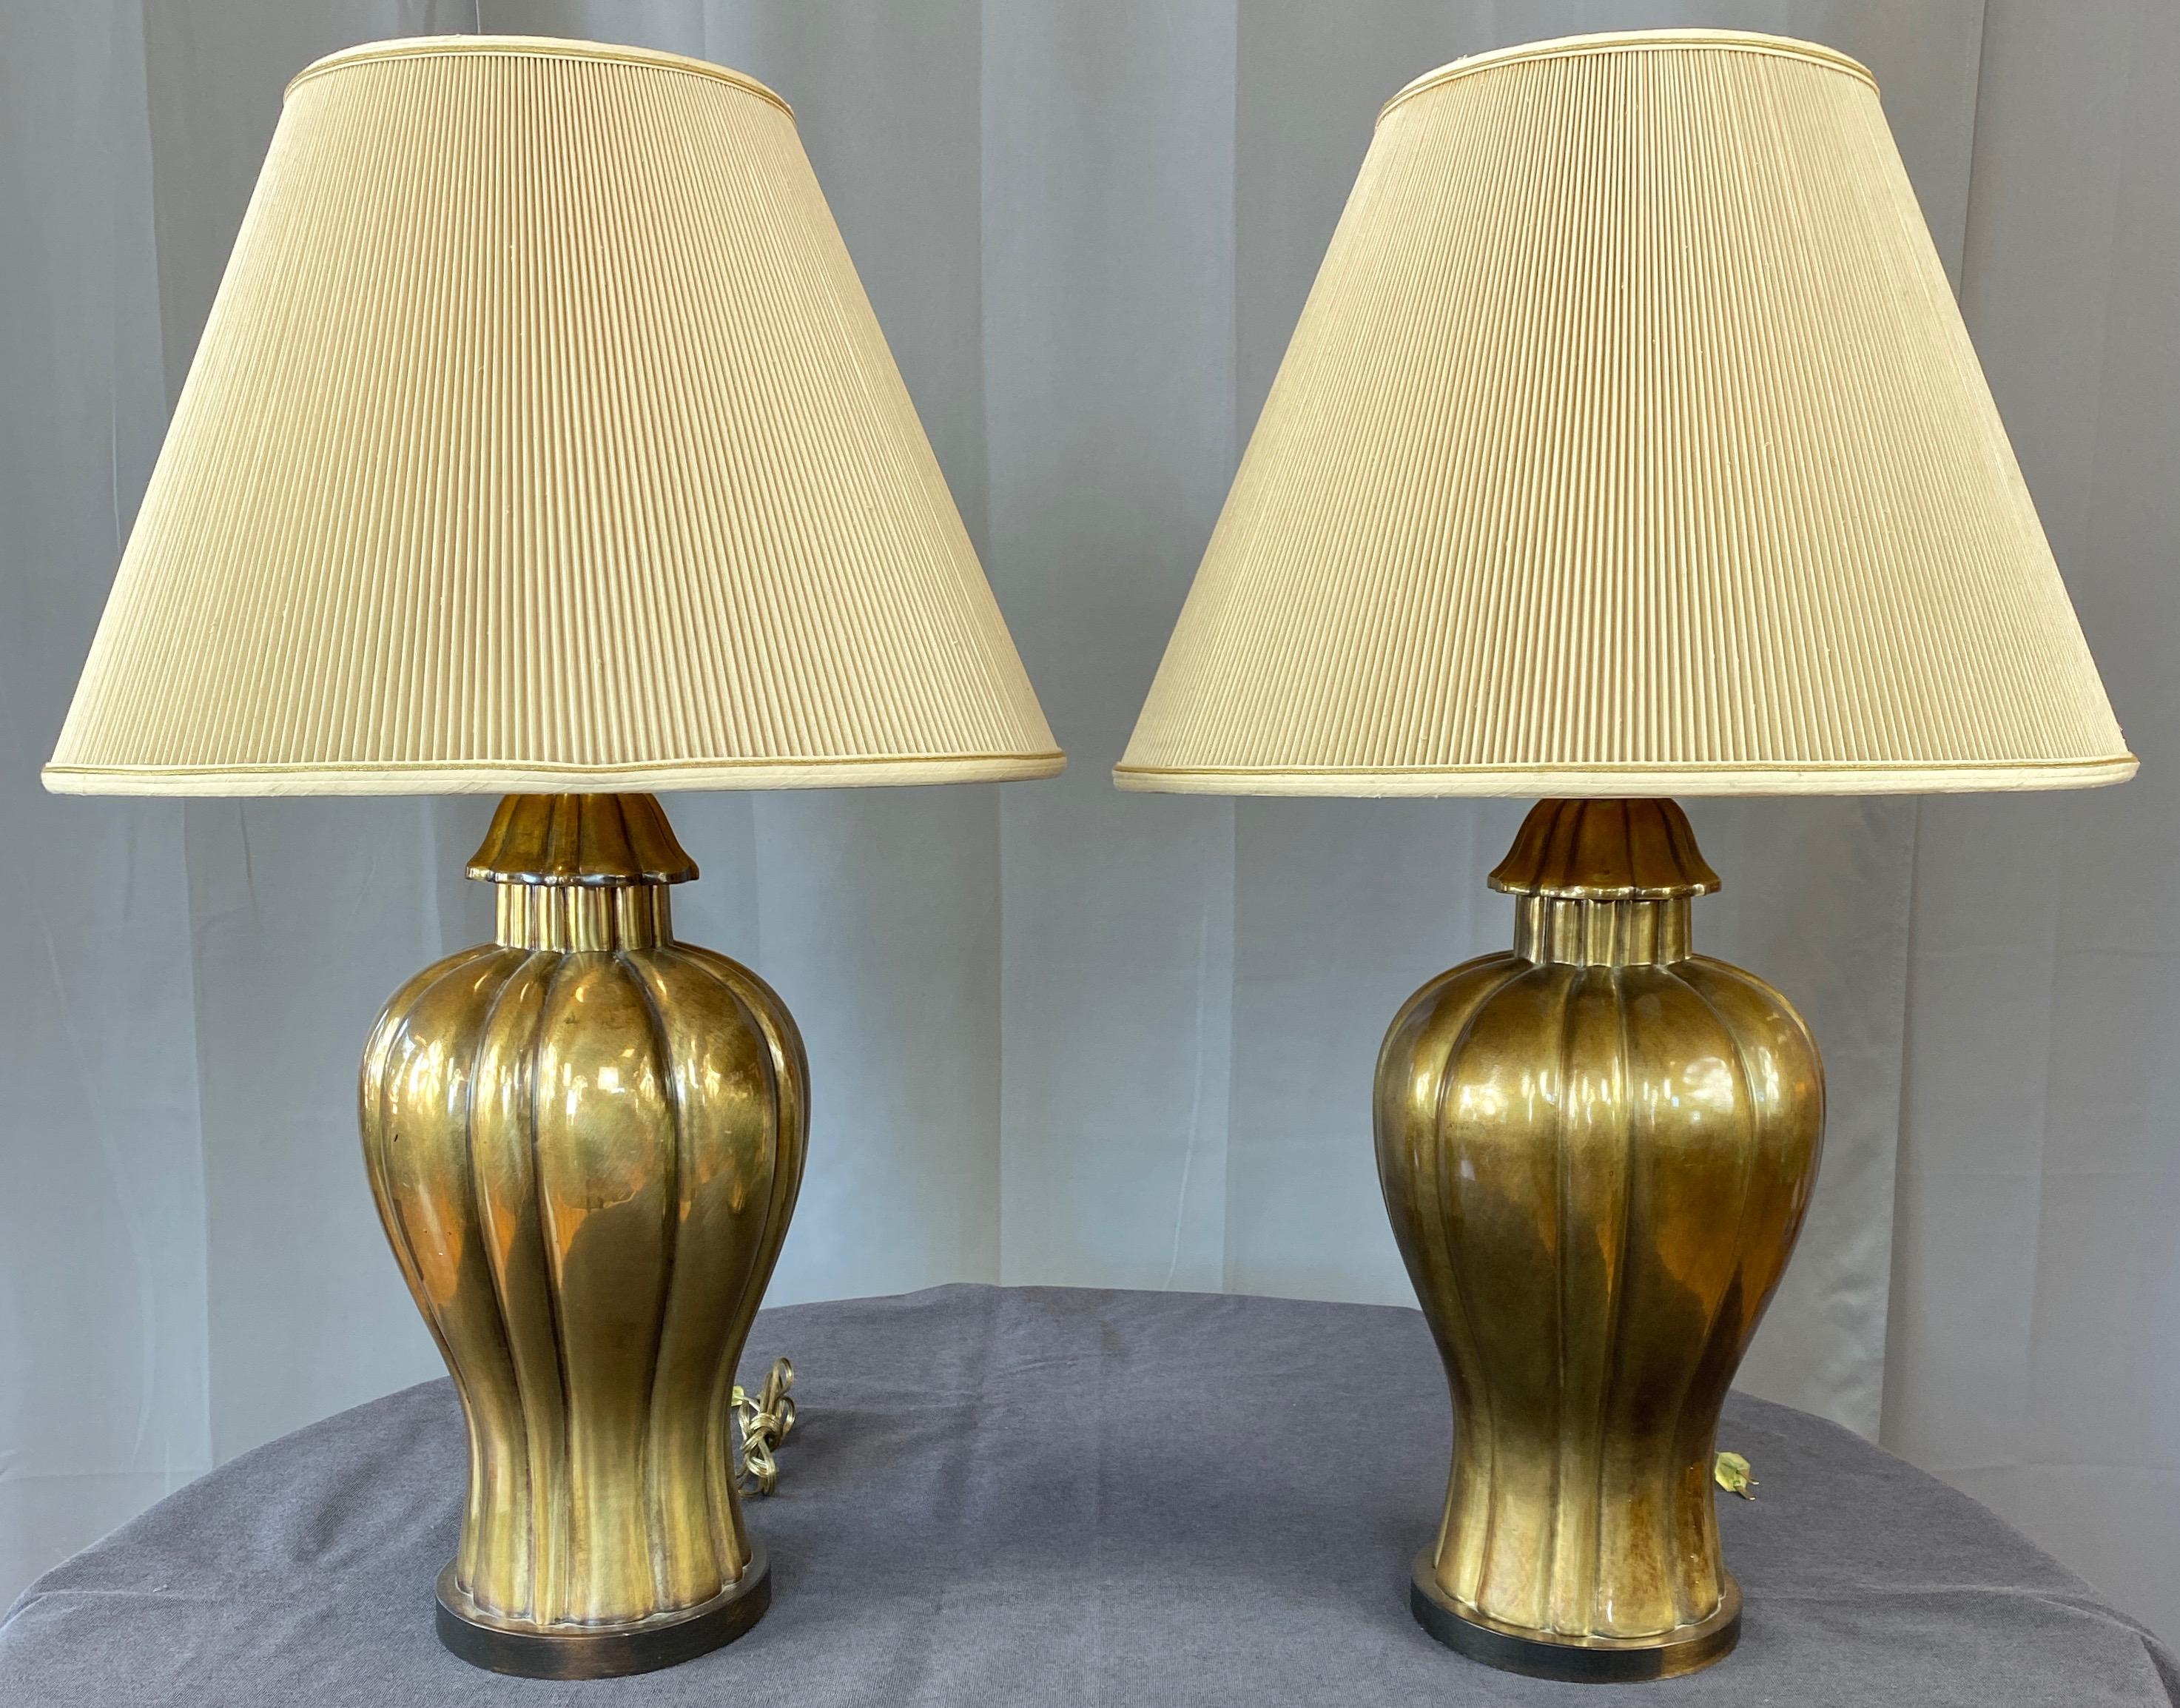 A very handsome pair of Hollywood Regency brass ginger jar table lamps with original shades by Frederick Cooper.

Curvaceous chinoiserie form with fluted body, neck, and cap. Elegant lines enhanced by a subtly antiqued brass finish with glossy